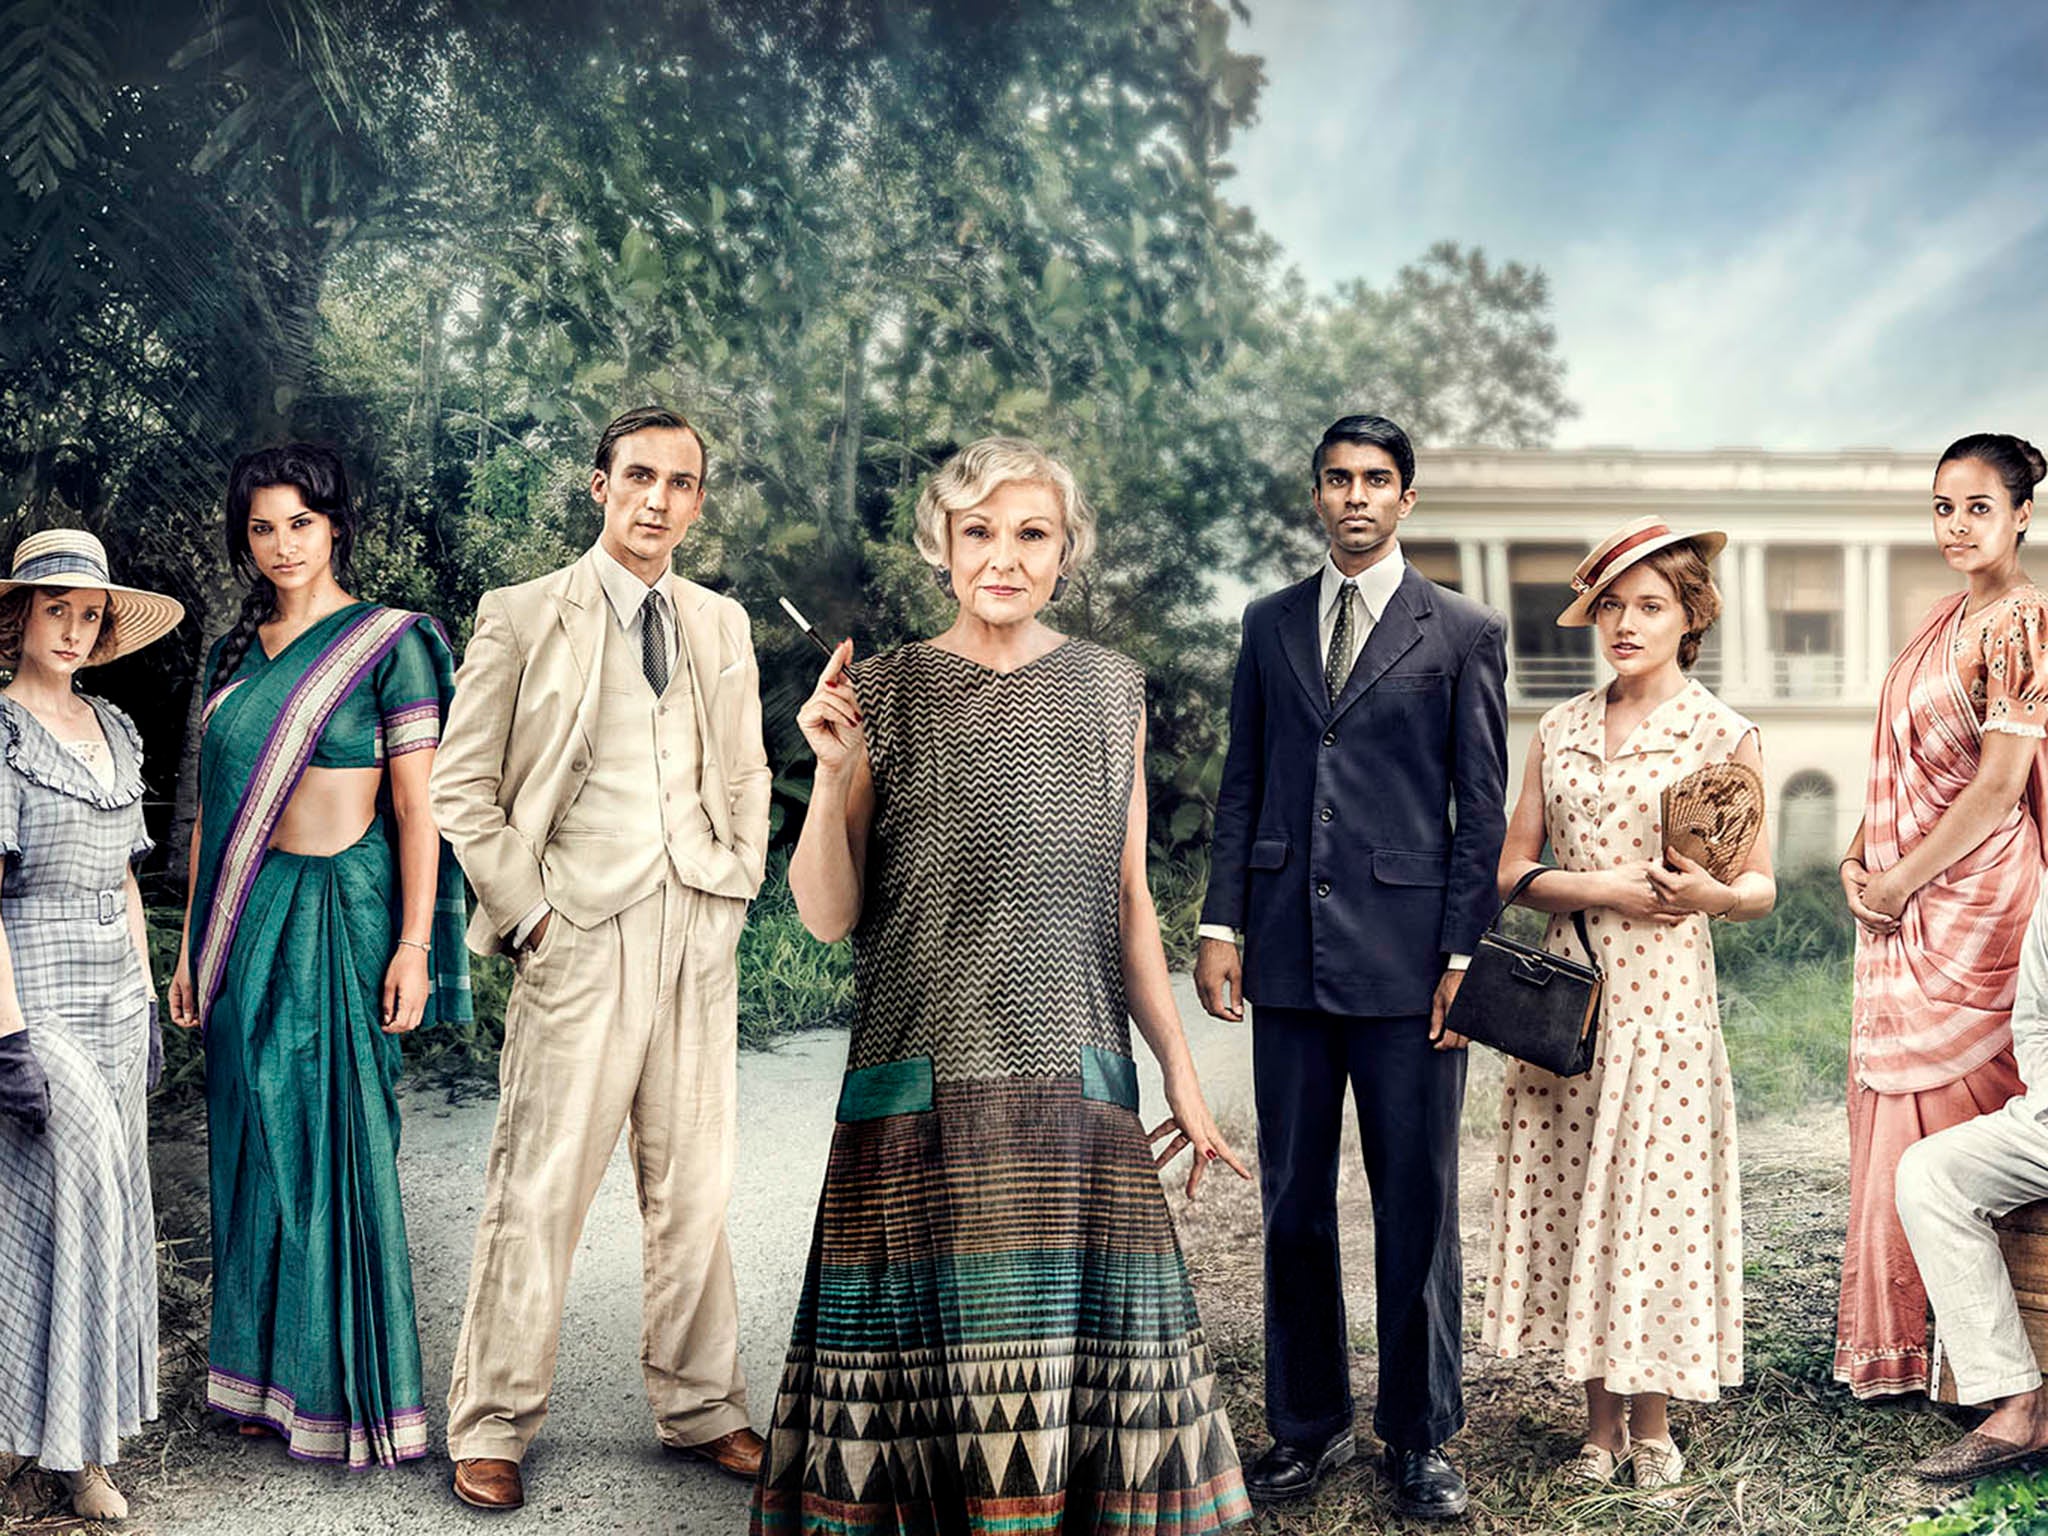 The cast of Indian Summers